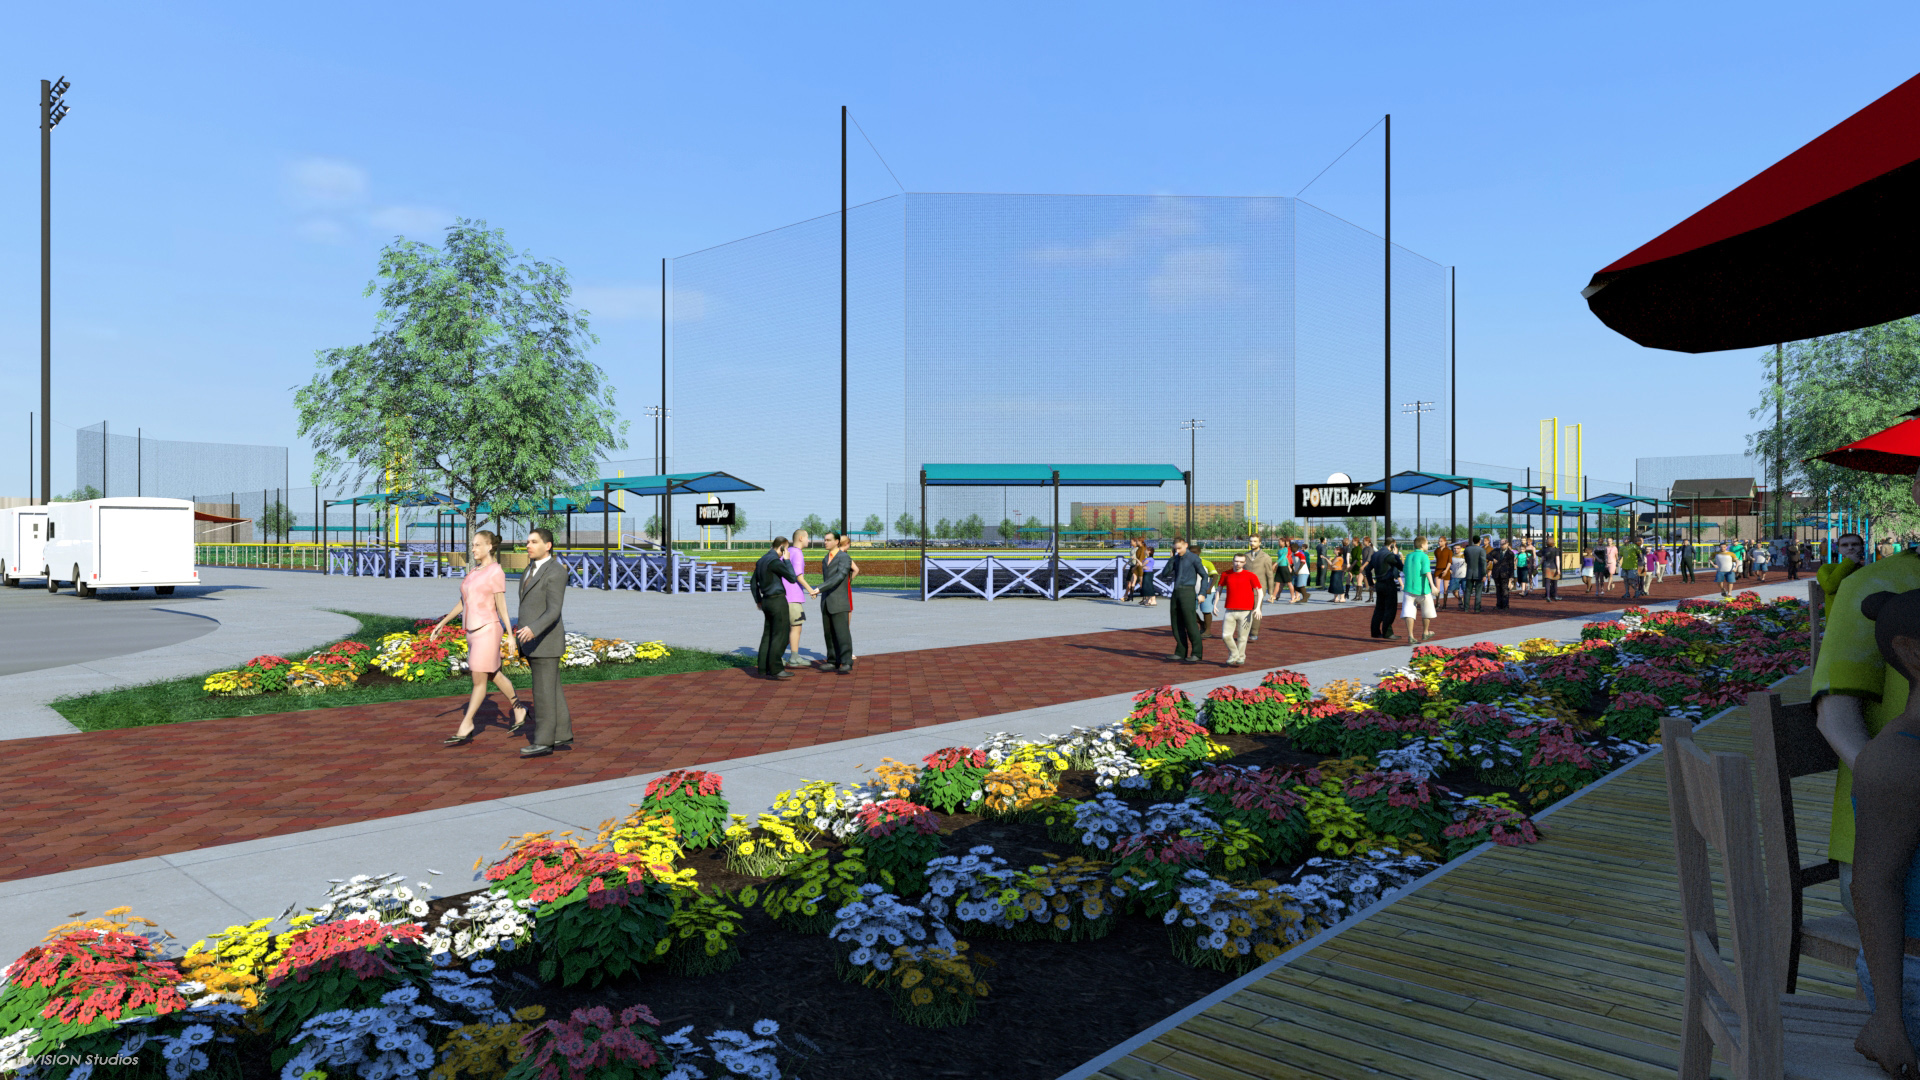 Youth sports complex ‘PowerPlex’ will open in St. Louis Mills - Call Newspapers